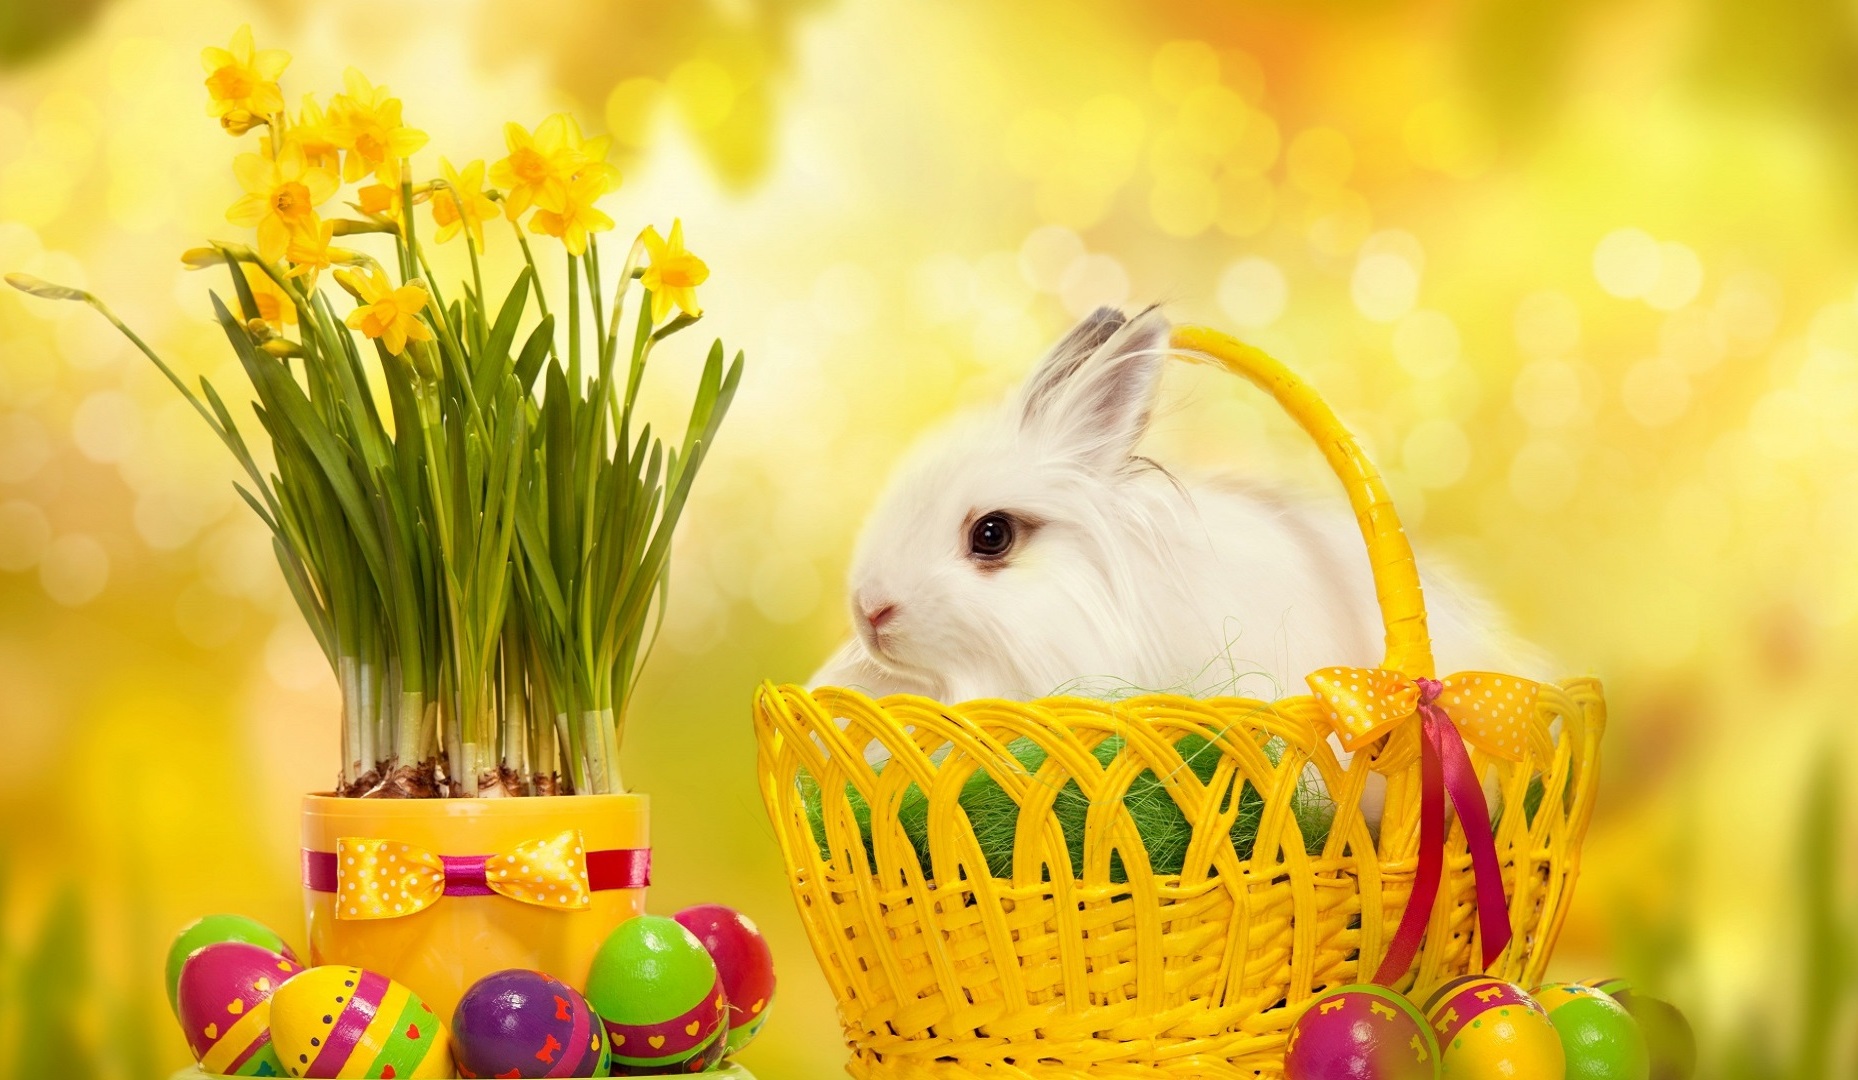 Free Easter Wallpaper Images 31z9epv   Bunny Happy Easter Free